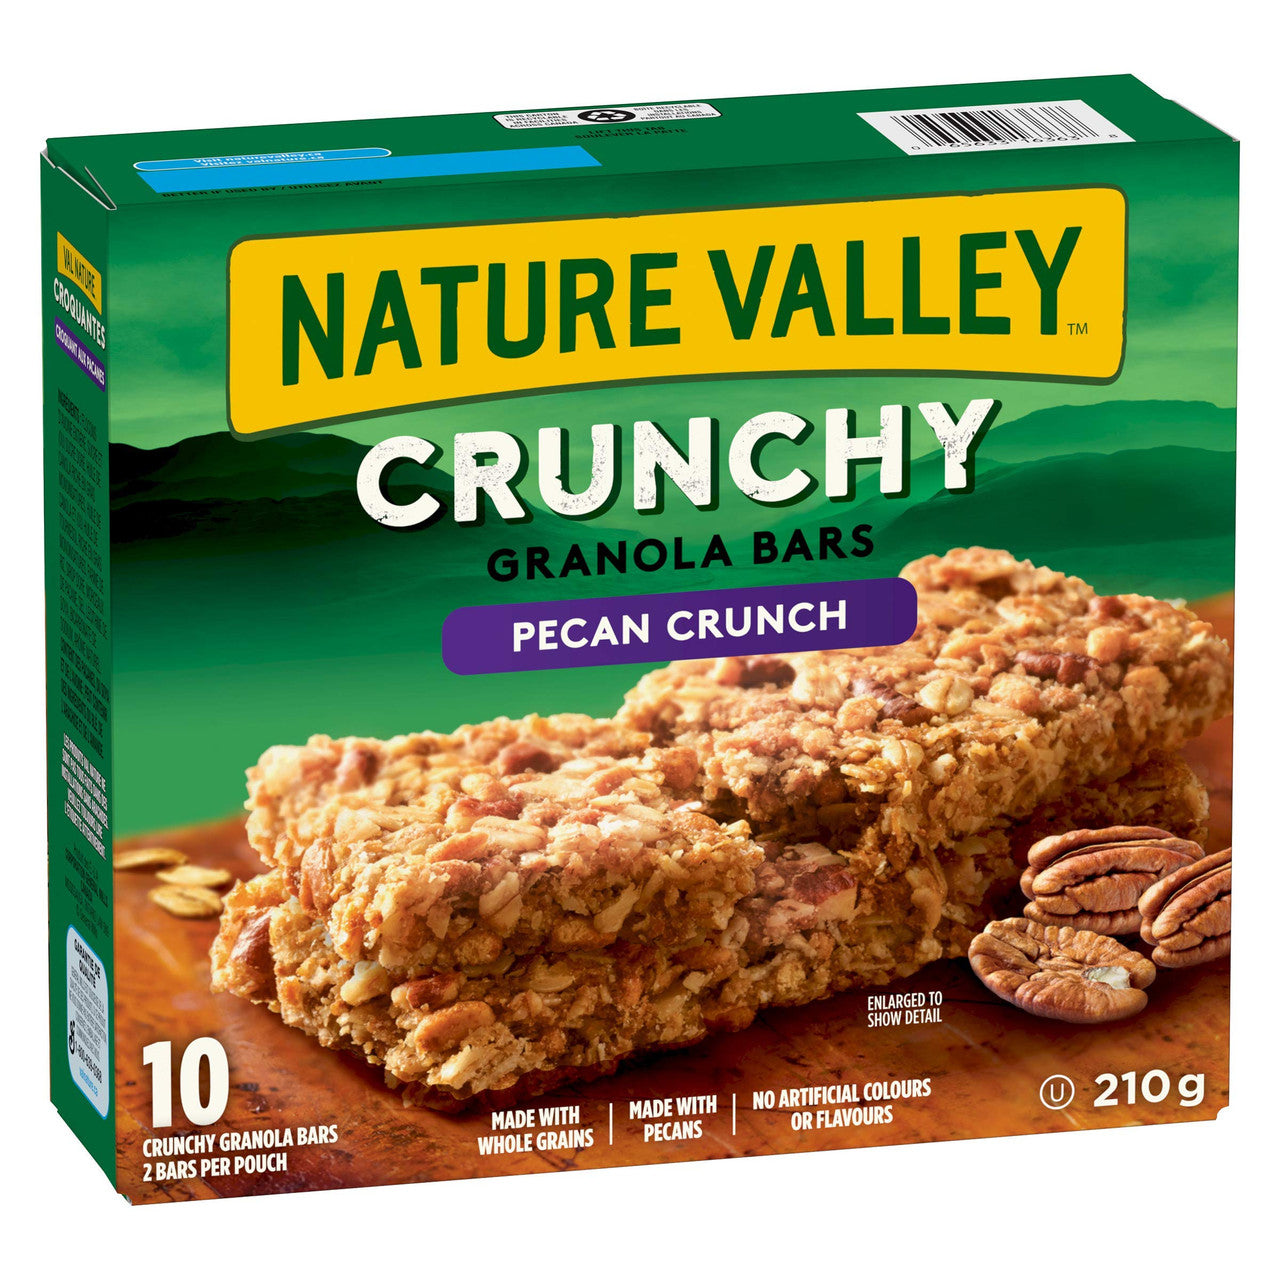 Nature Valley Crunchy Granola Bars Pecan Crunch,(10ct Box), 210g/7.4 oz., {Imported from Canada}